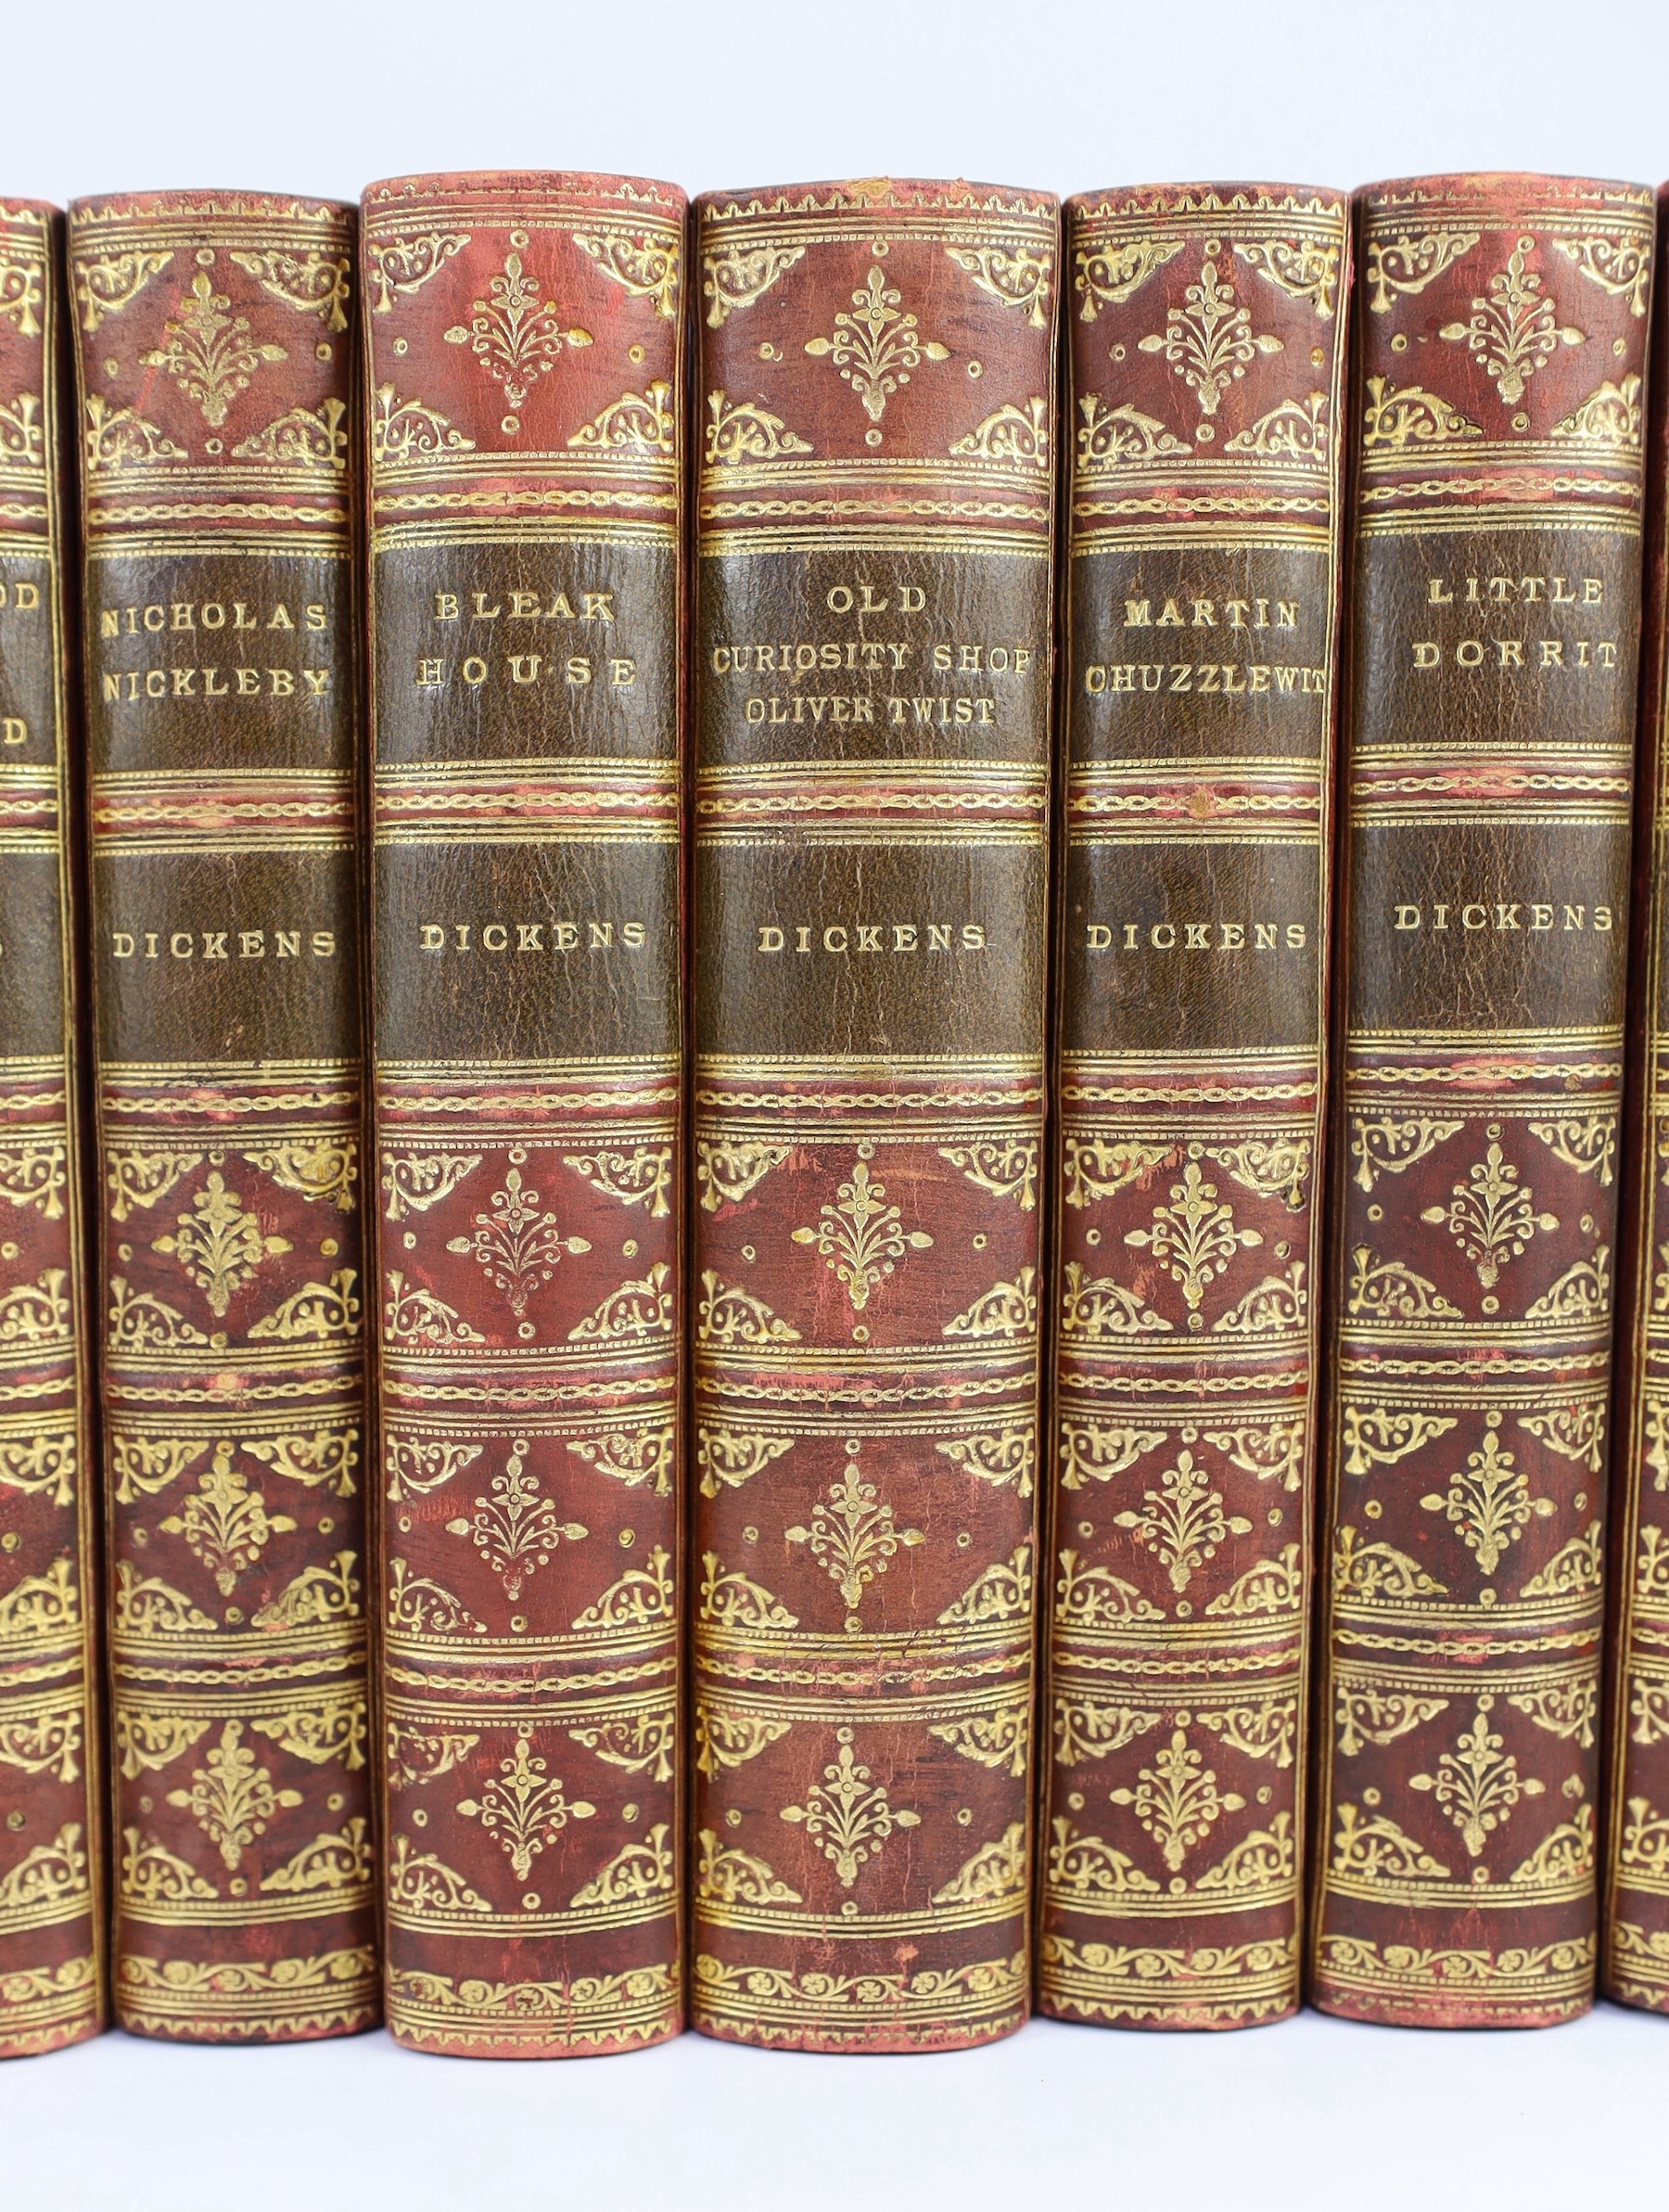 Dickens, Charles - Works - ‘’The Charles Dickens edition’’, 14 vols (of 21) 8vo, half red morocco, with marbled boards, Chapman and Hall, London, c. 1890